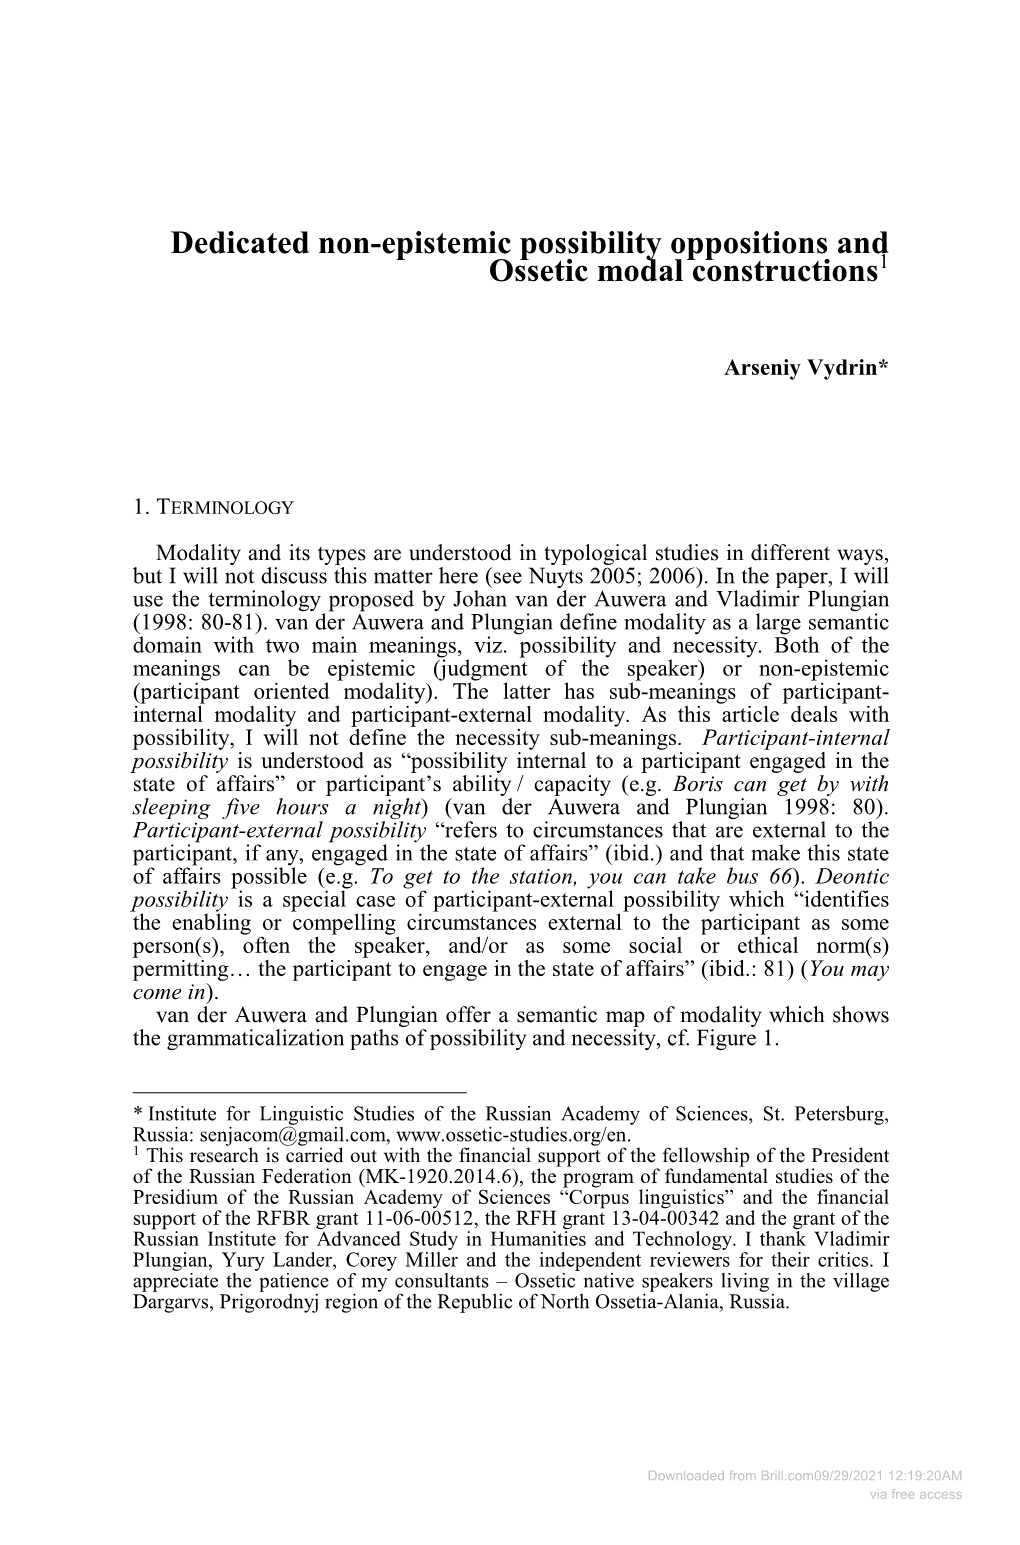 Dedicated Non-Epistemic Possibility Oppositions and Ossetic Modal Constructions1